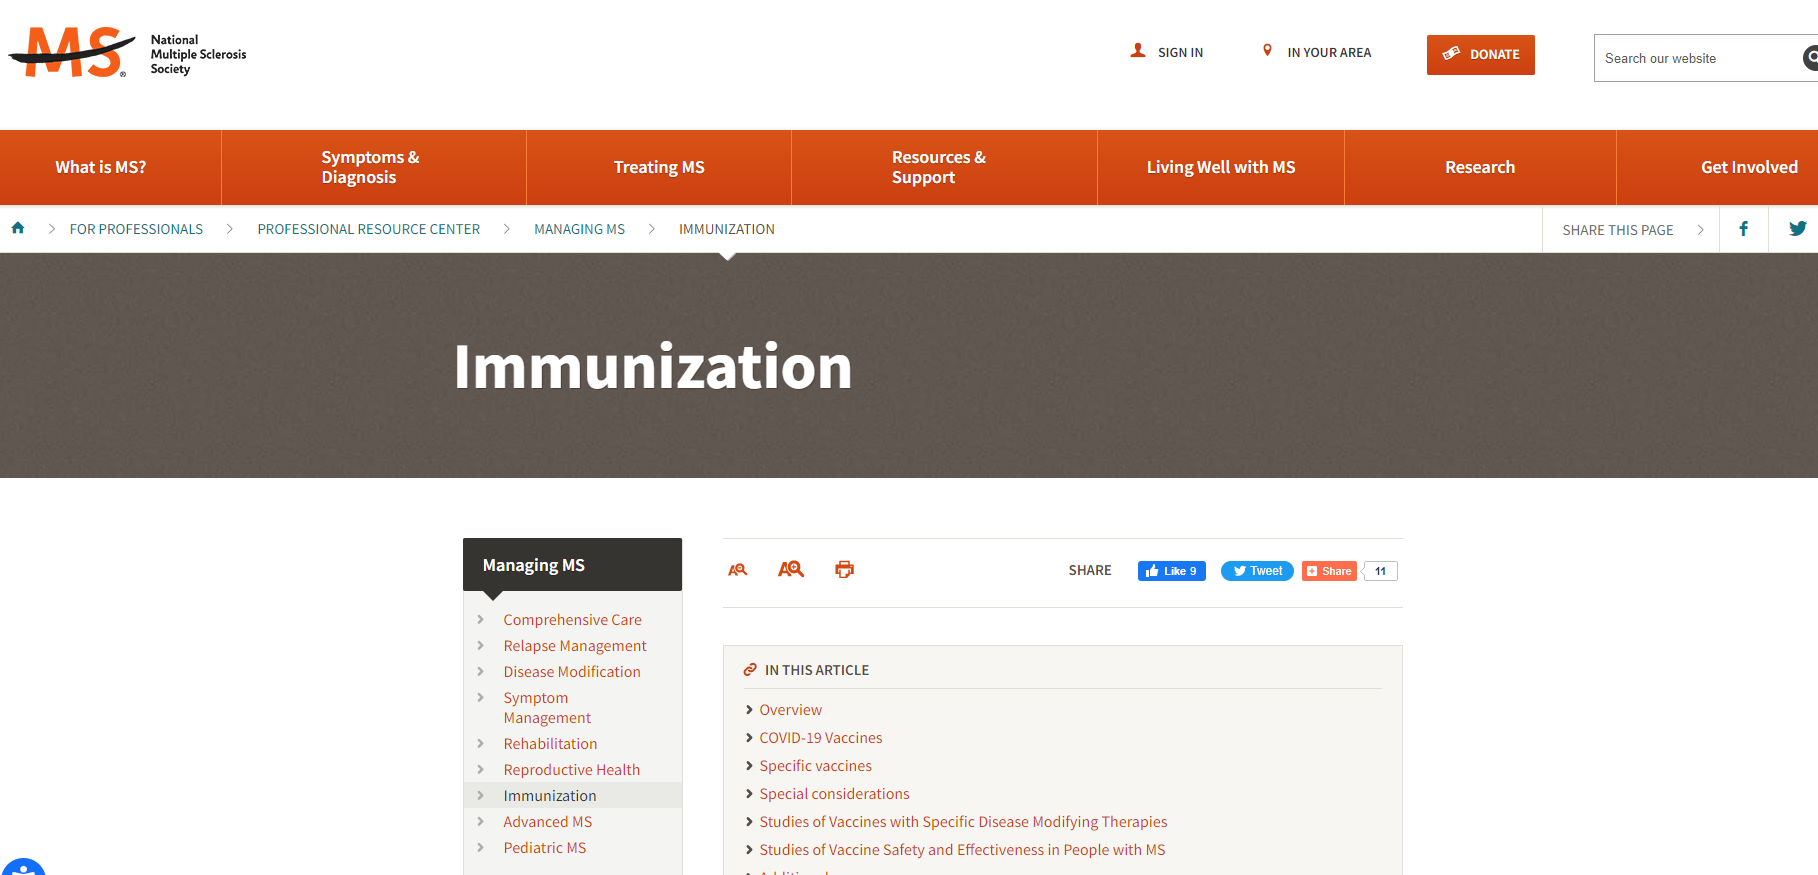 Webpage shows an orange banner at the top. A gray banner below it has the title "Immunization". Below the banners are multiple hyperlinked resources and text.